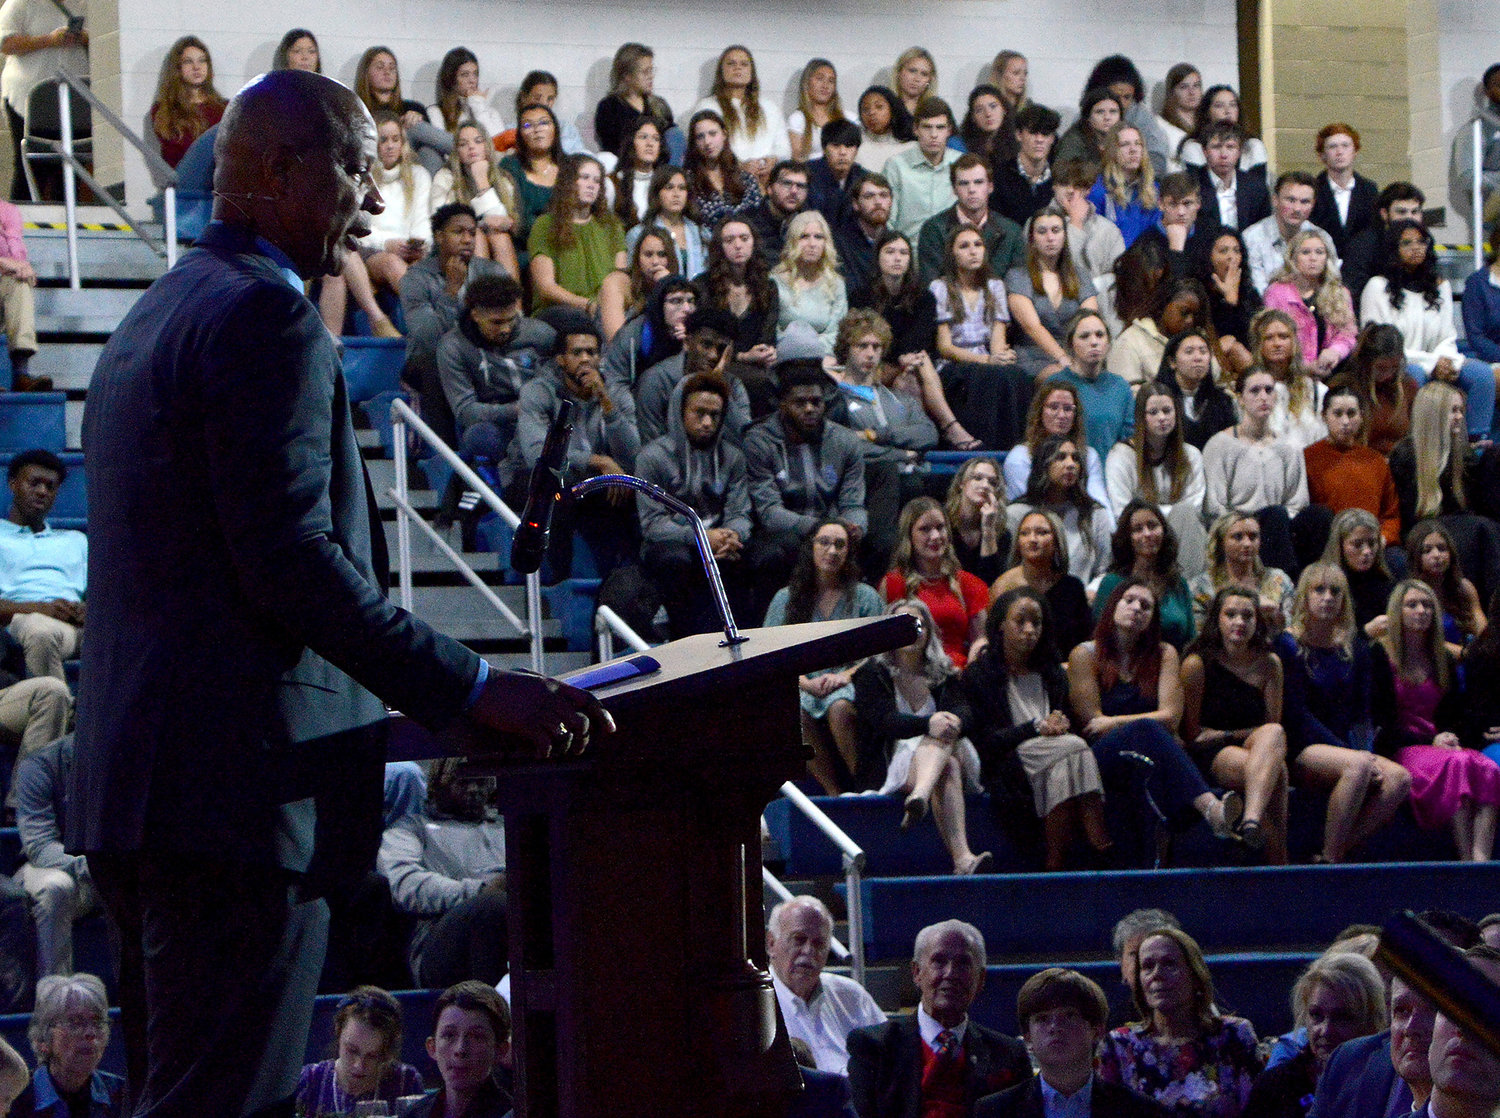 Former baseball superstar Darryl Strawberry speaks to sponsors and student-athletes during the President’s Gala at Shorter University in Rome, Ga., Dec. 1, 2022. (Index/Henry Durand)